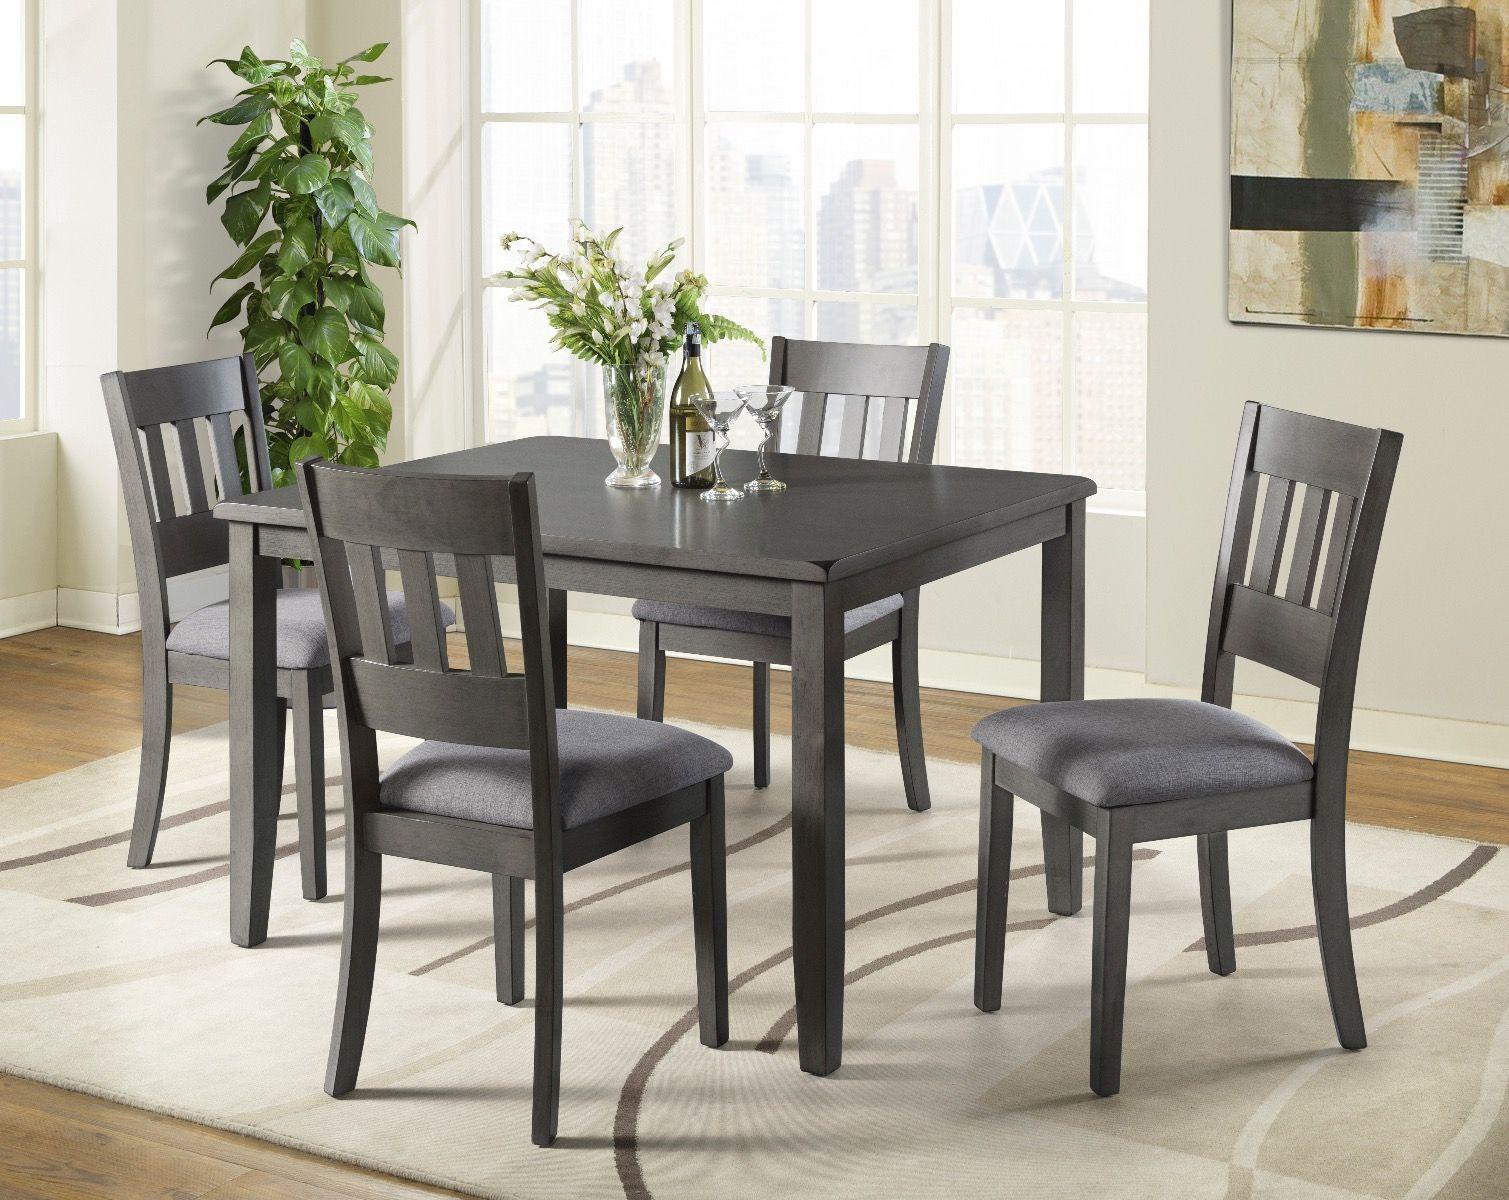 Gray Diniing Table with 4 Chairs